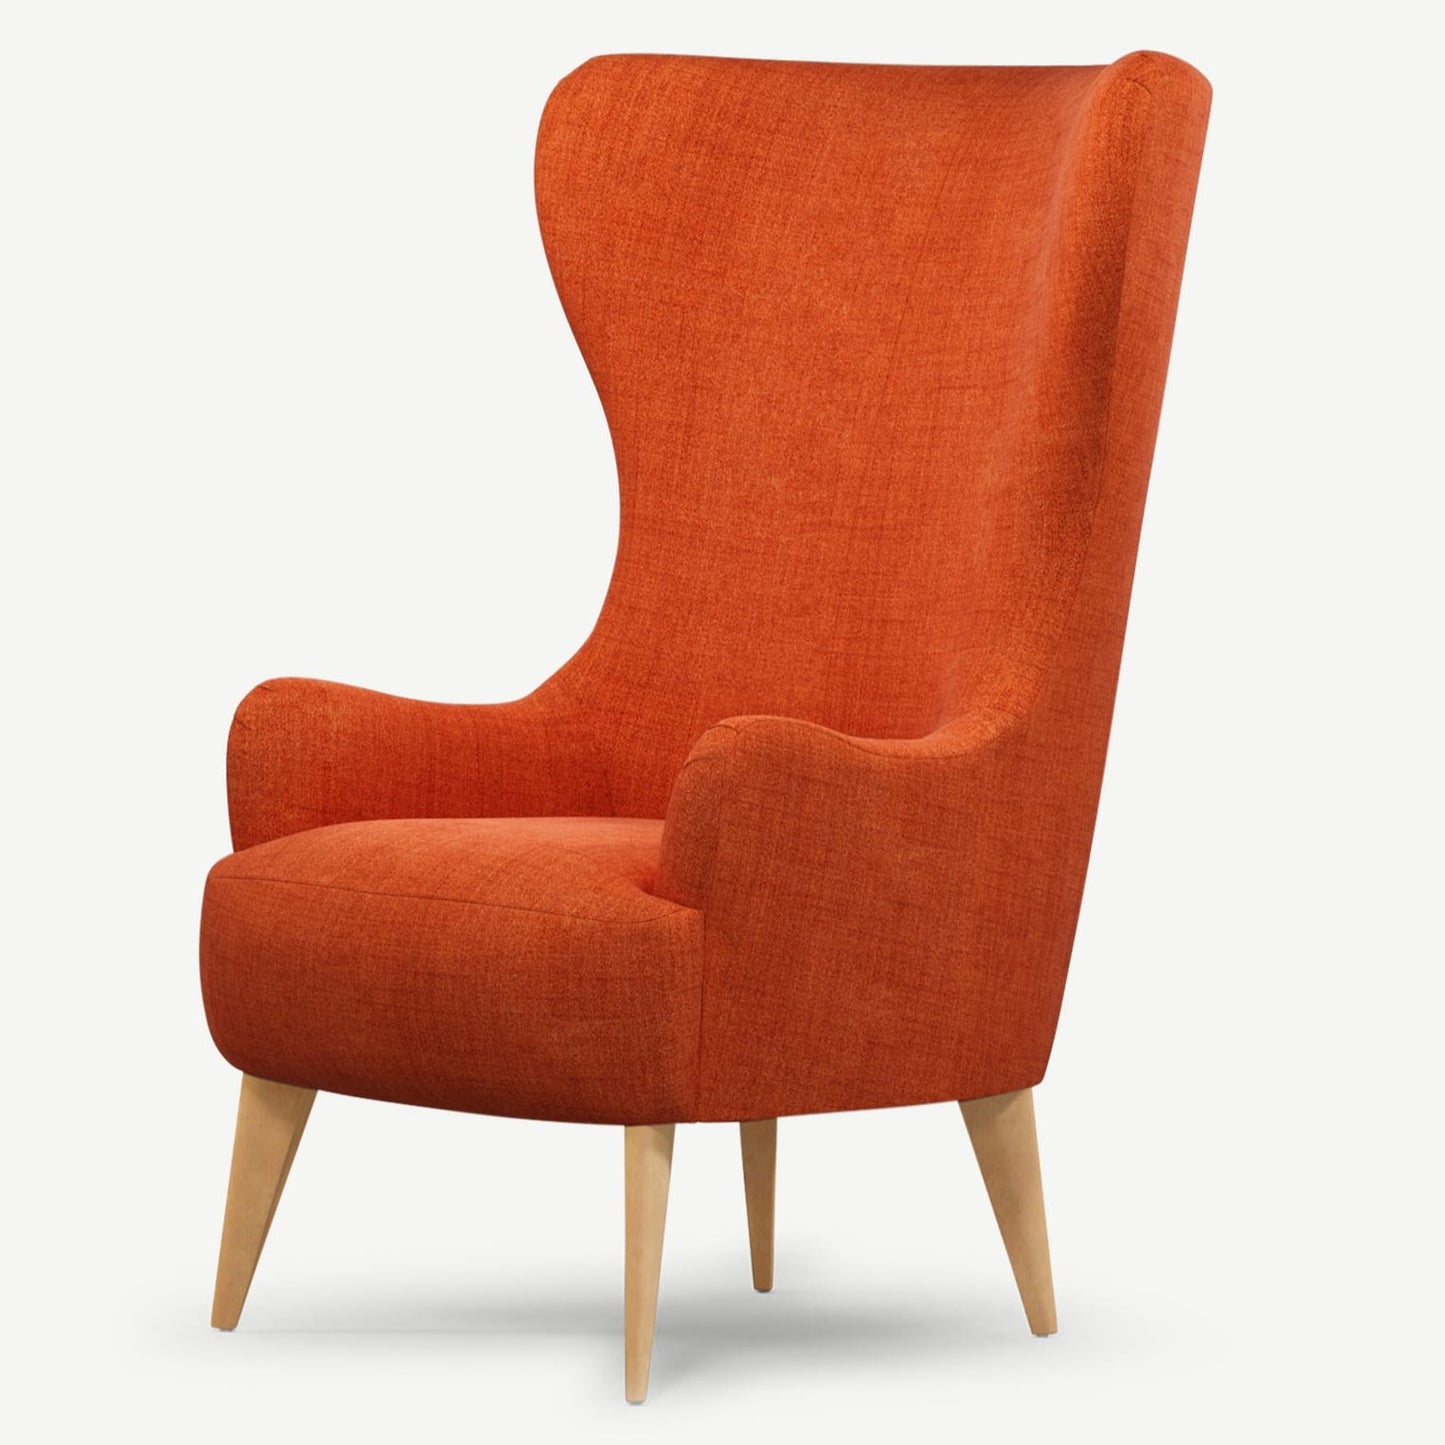 Biden Accent Arm Chair for Living Room